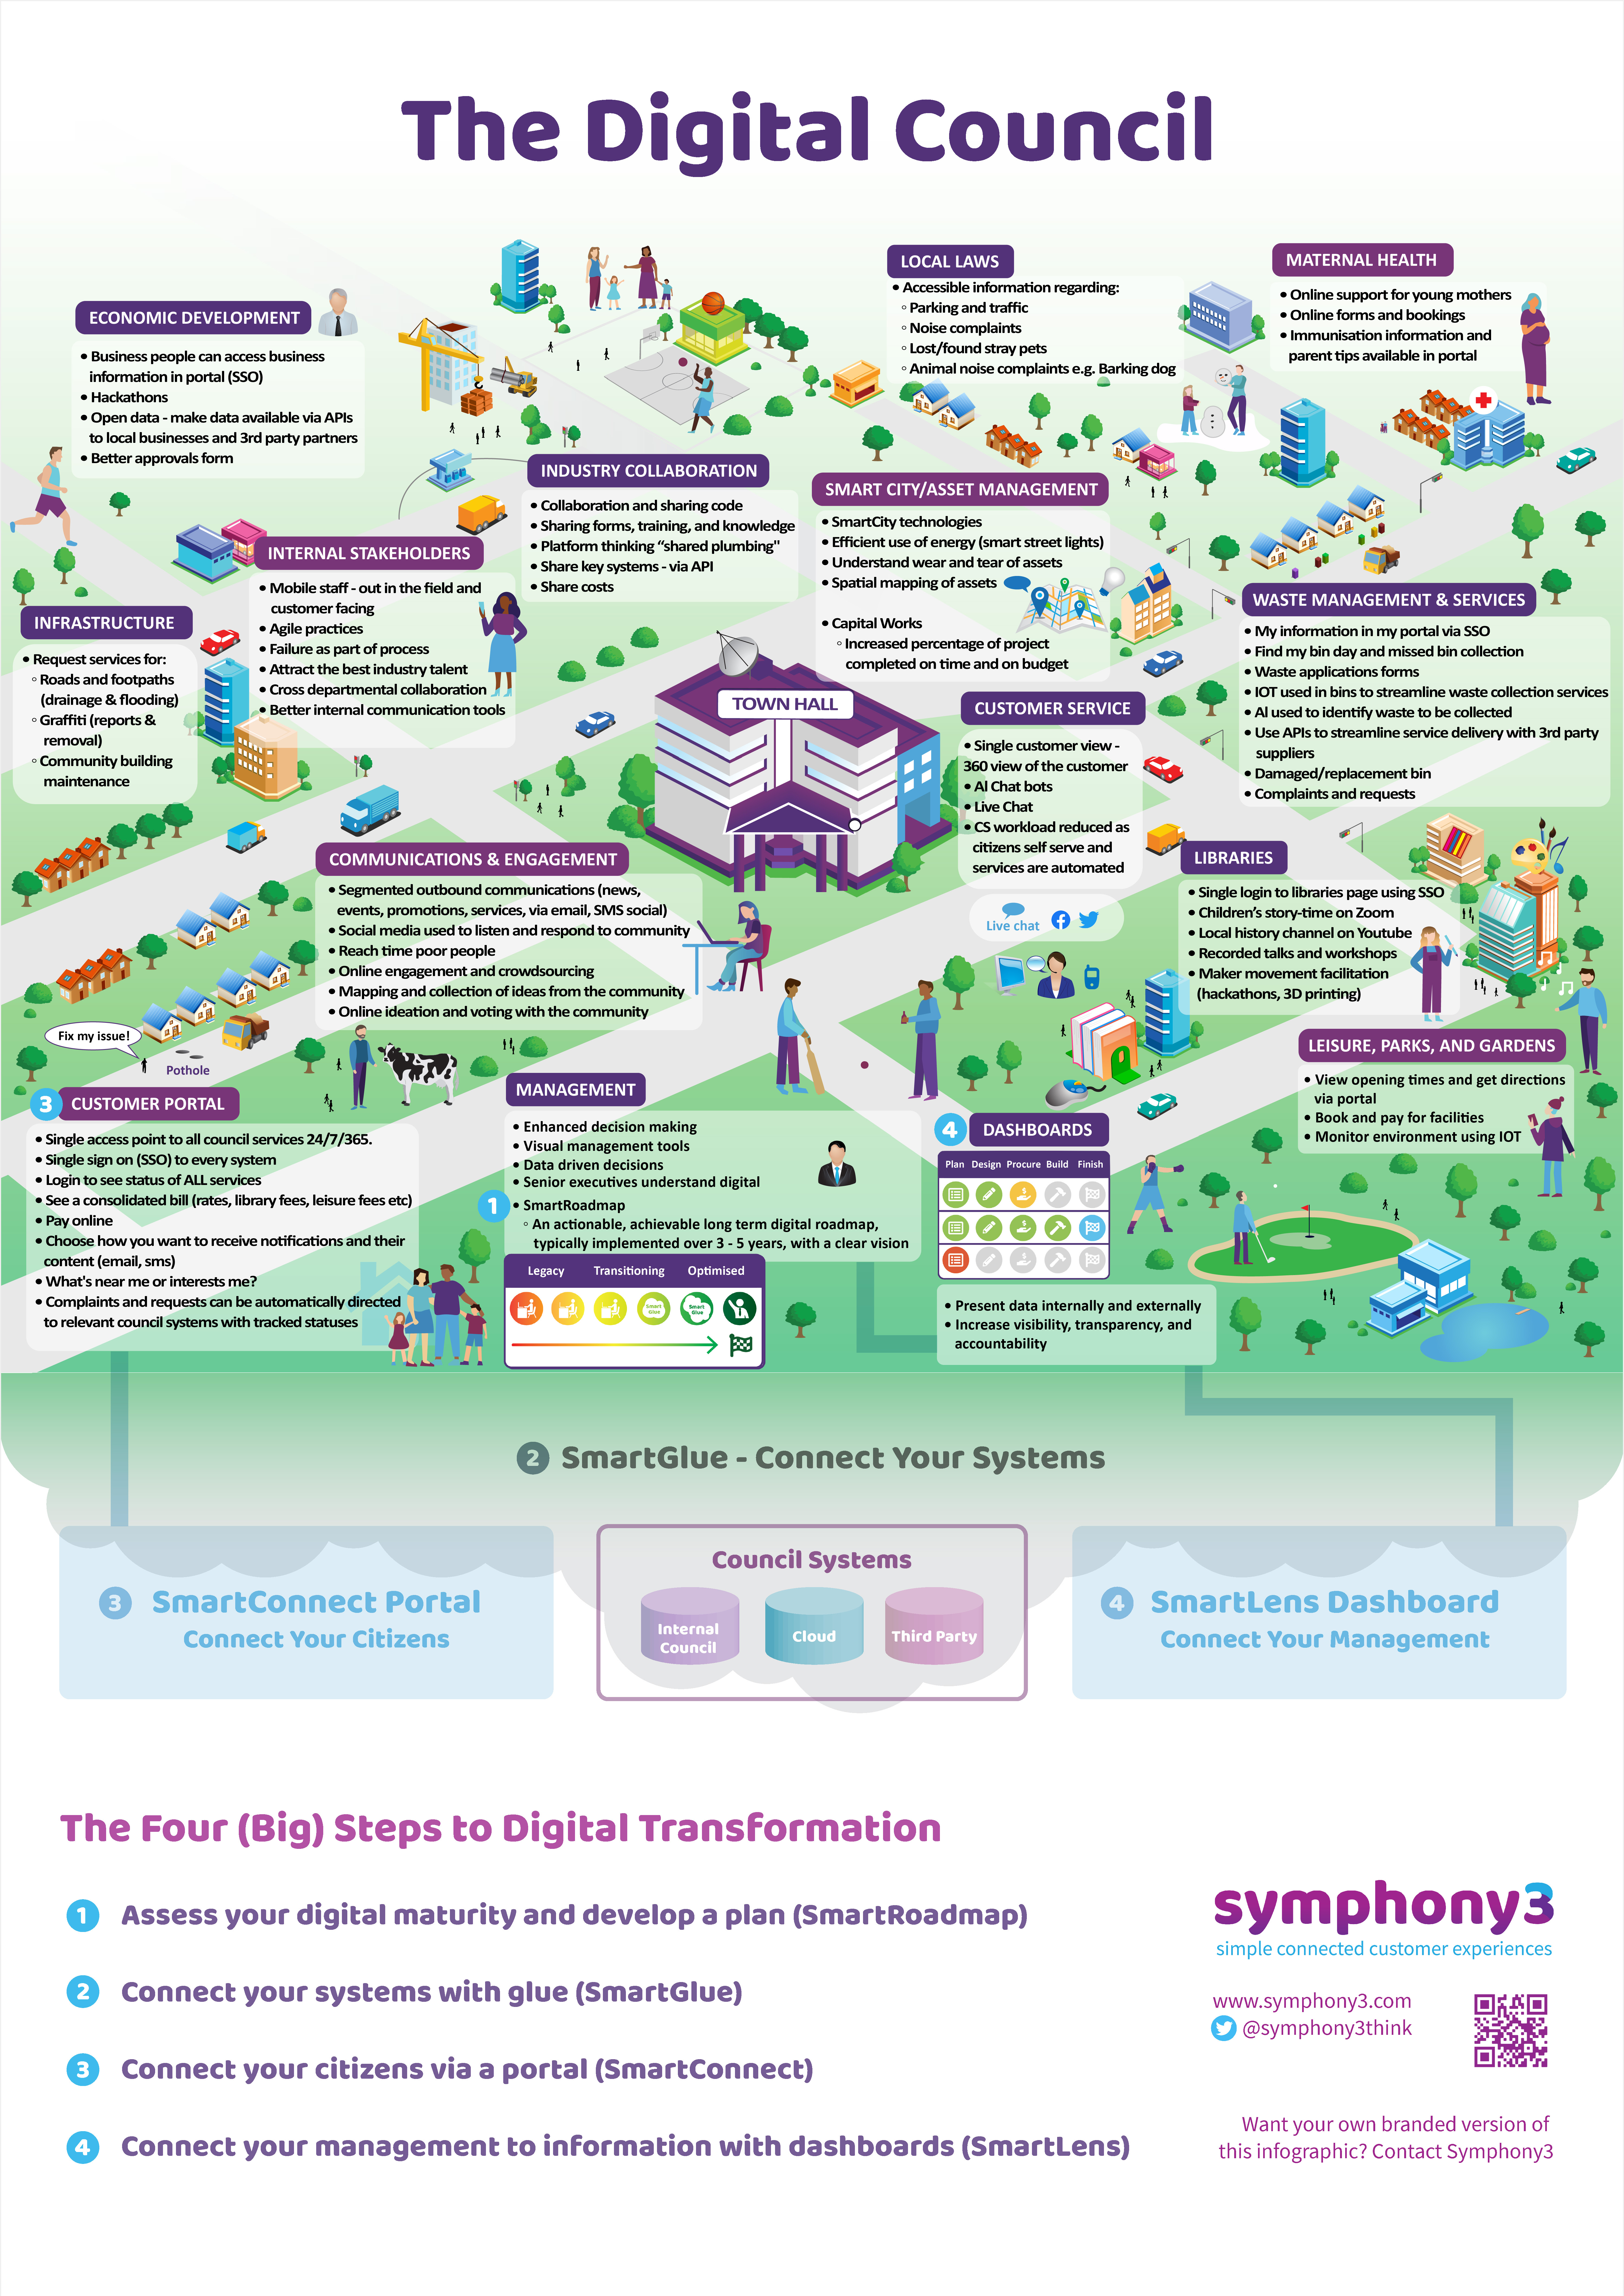 The Digital Council 2022 by Symphony3